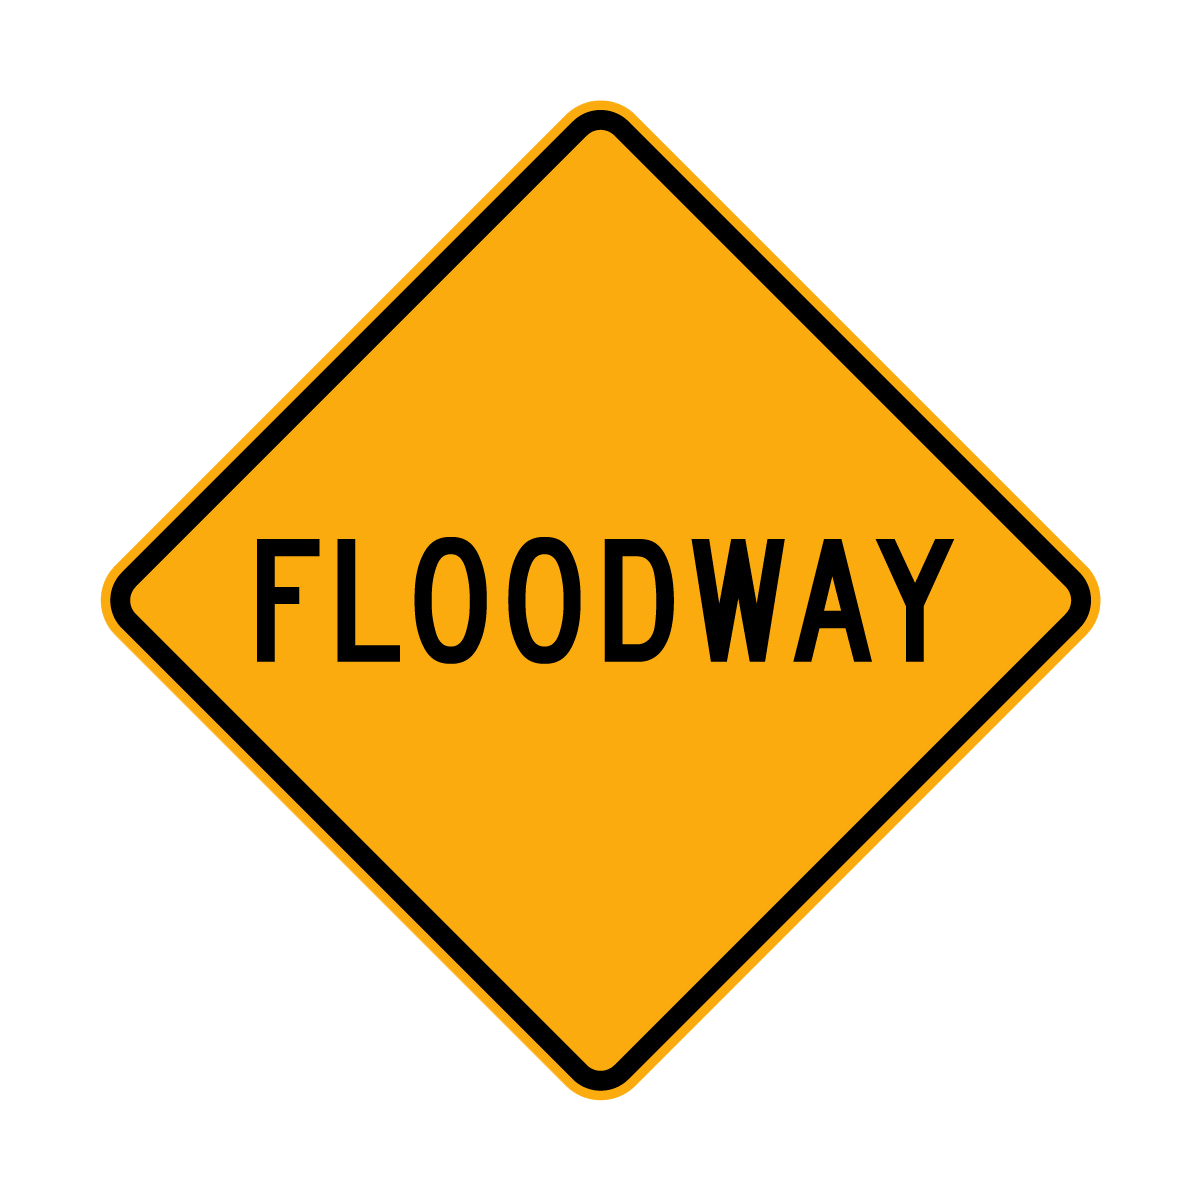 Warning: Floodway Sign